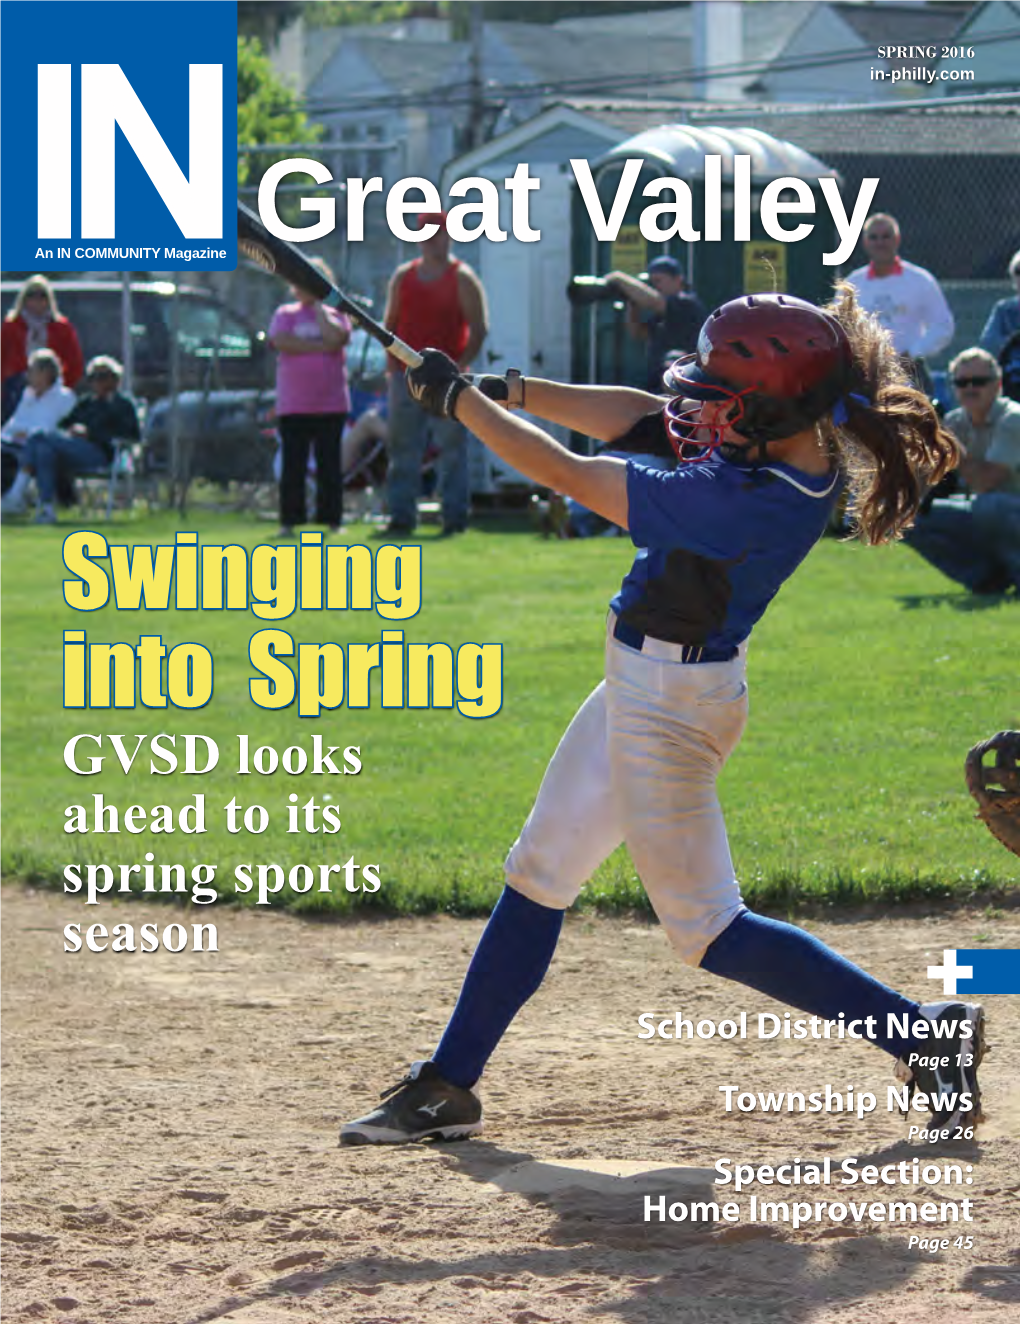 Great Valley | Spring 2016